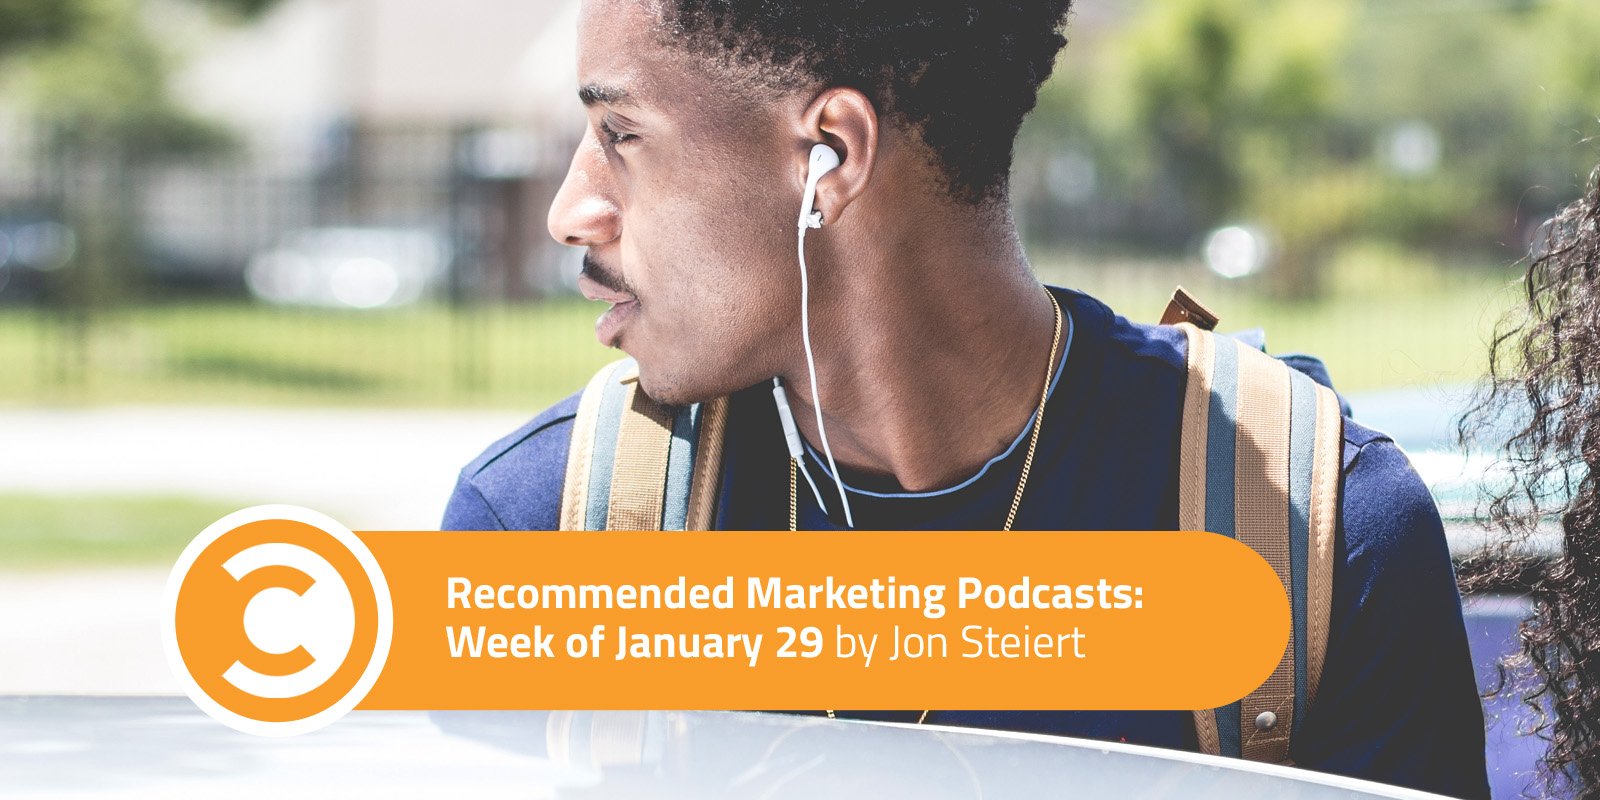 Recommended Marketing Podcasts Week of January 29